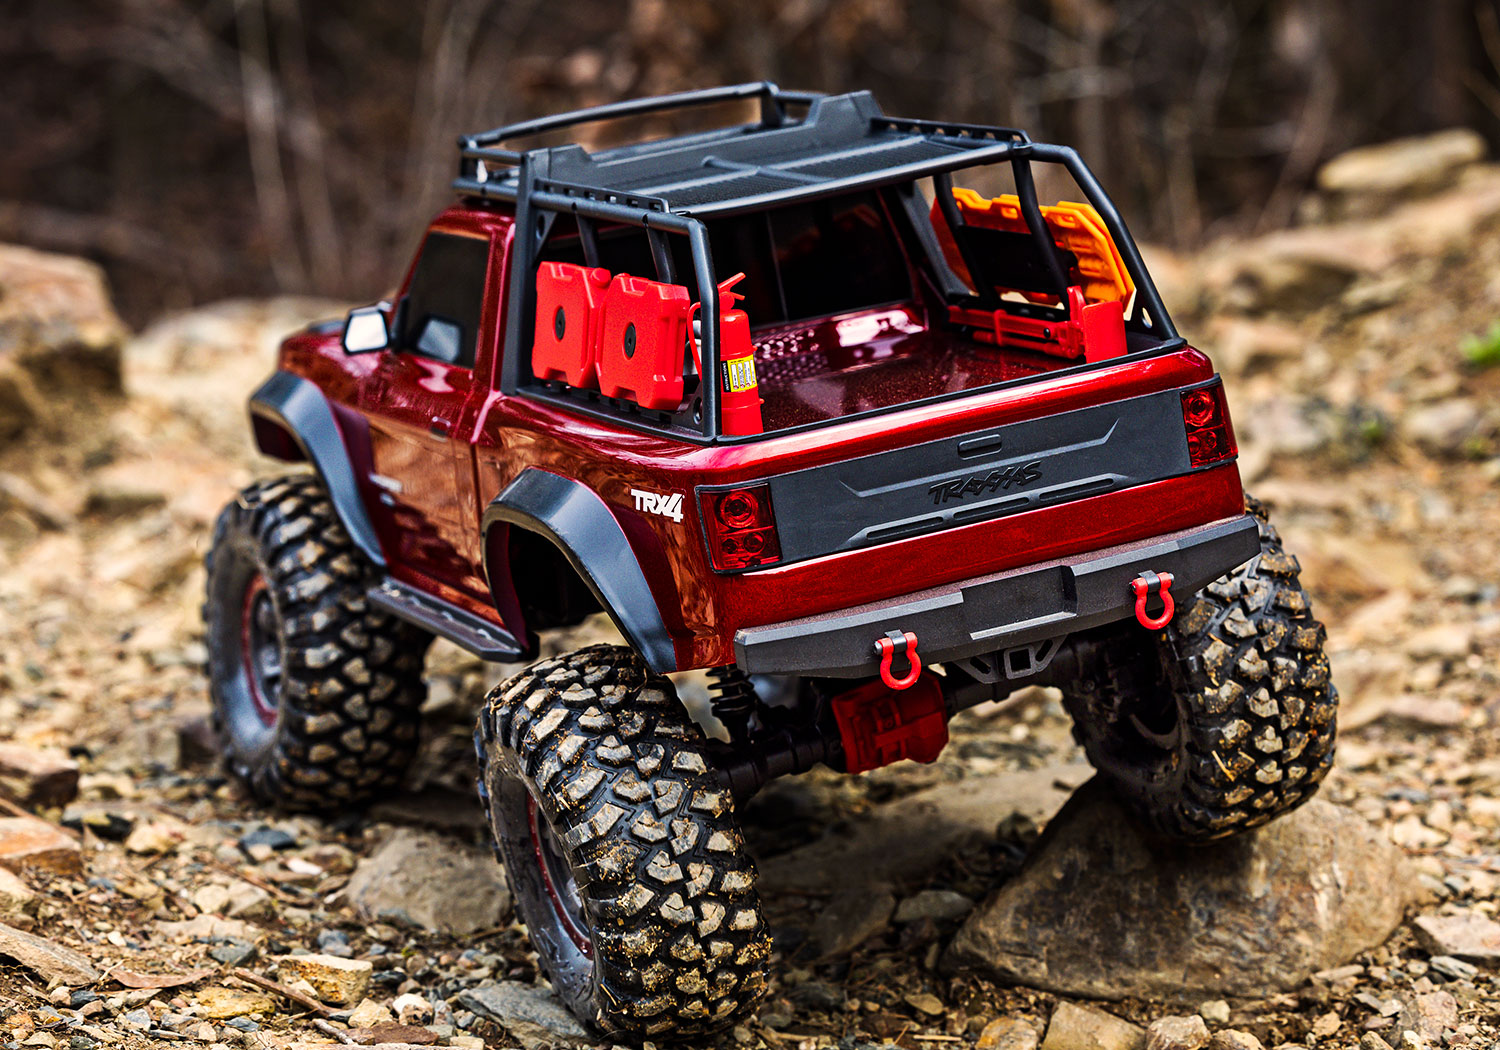 PACK ECO 100% RTR TRX-4 SPORT HIGH TRAIL ROUGE LIPO 2S 5800 MAH CHARGEUR TRAXXAS SAC OFFERT